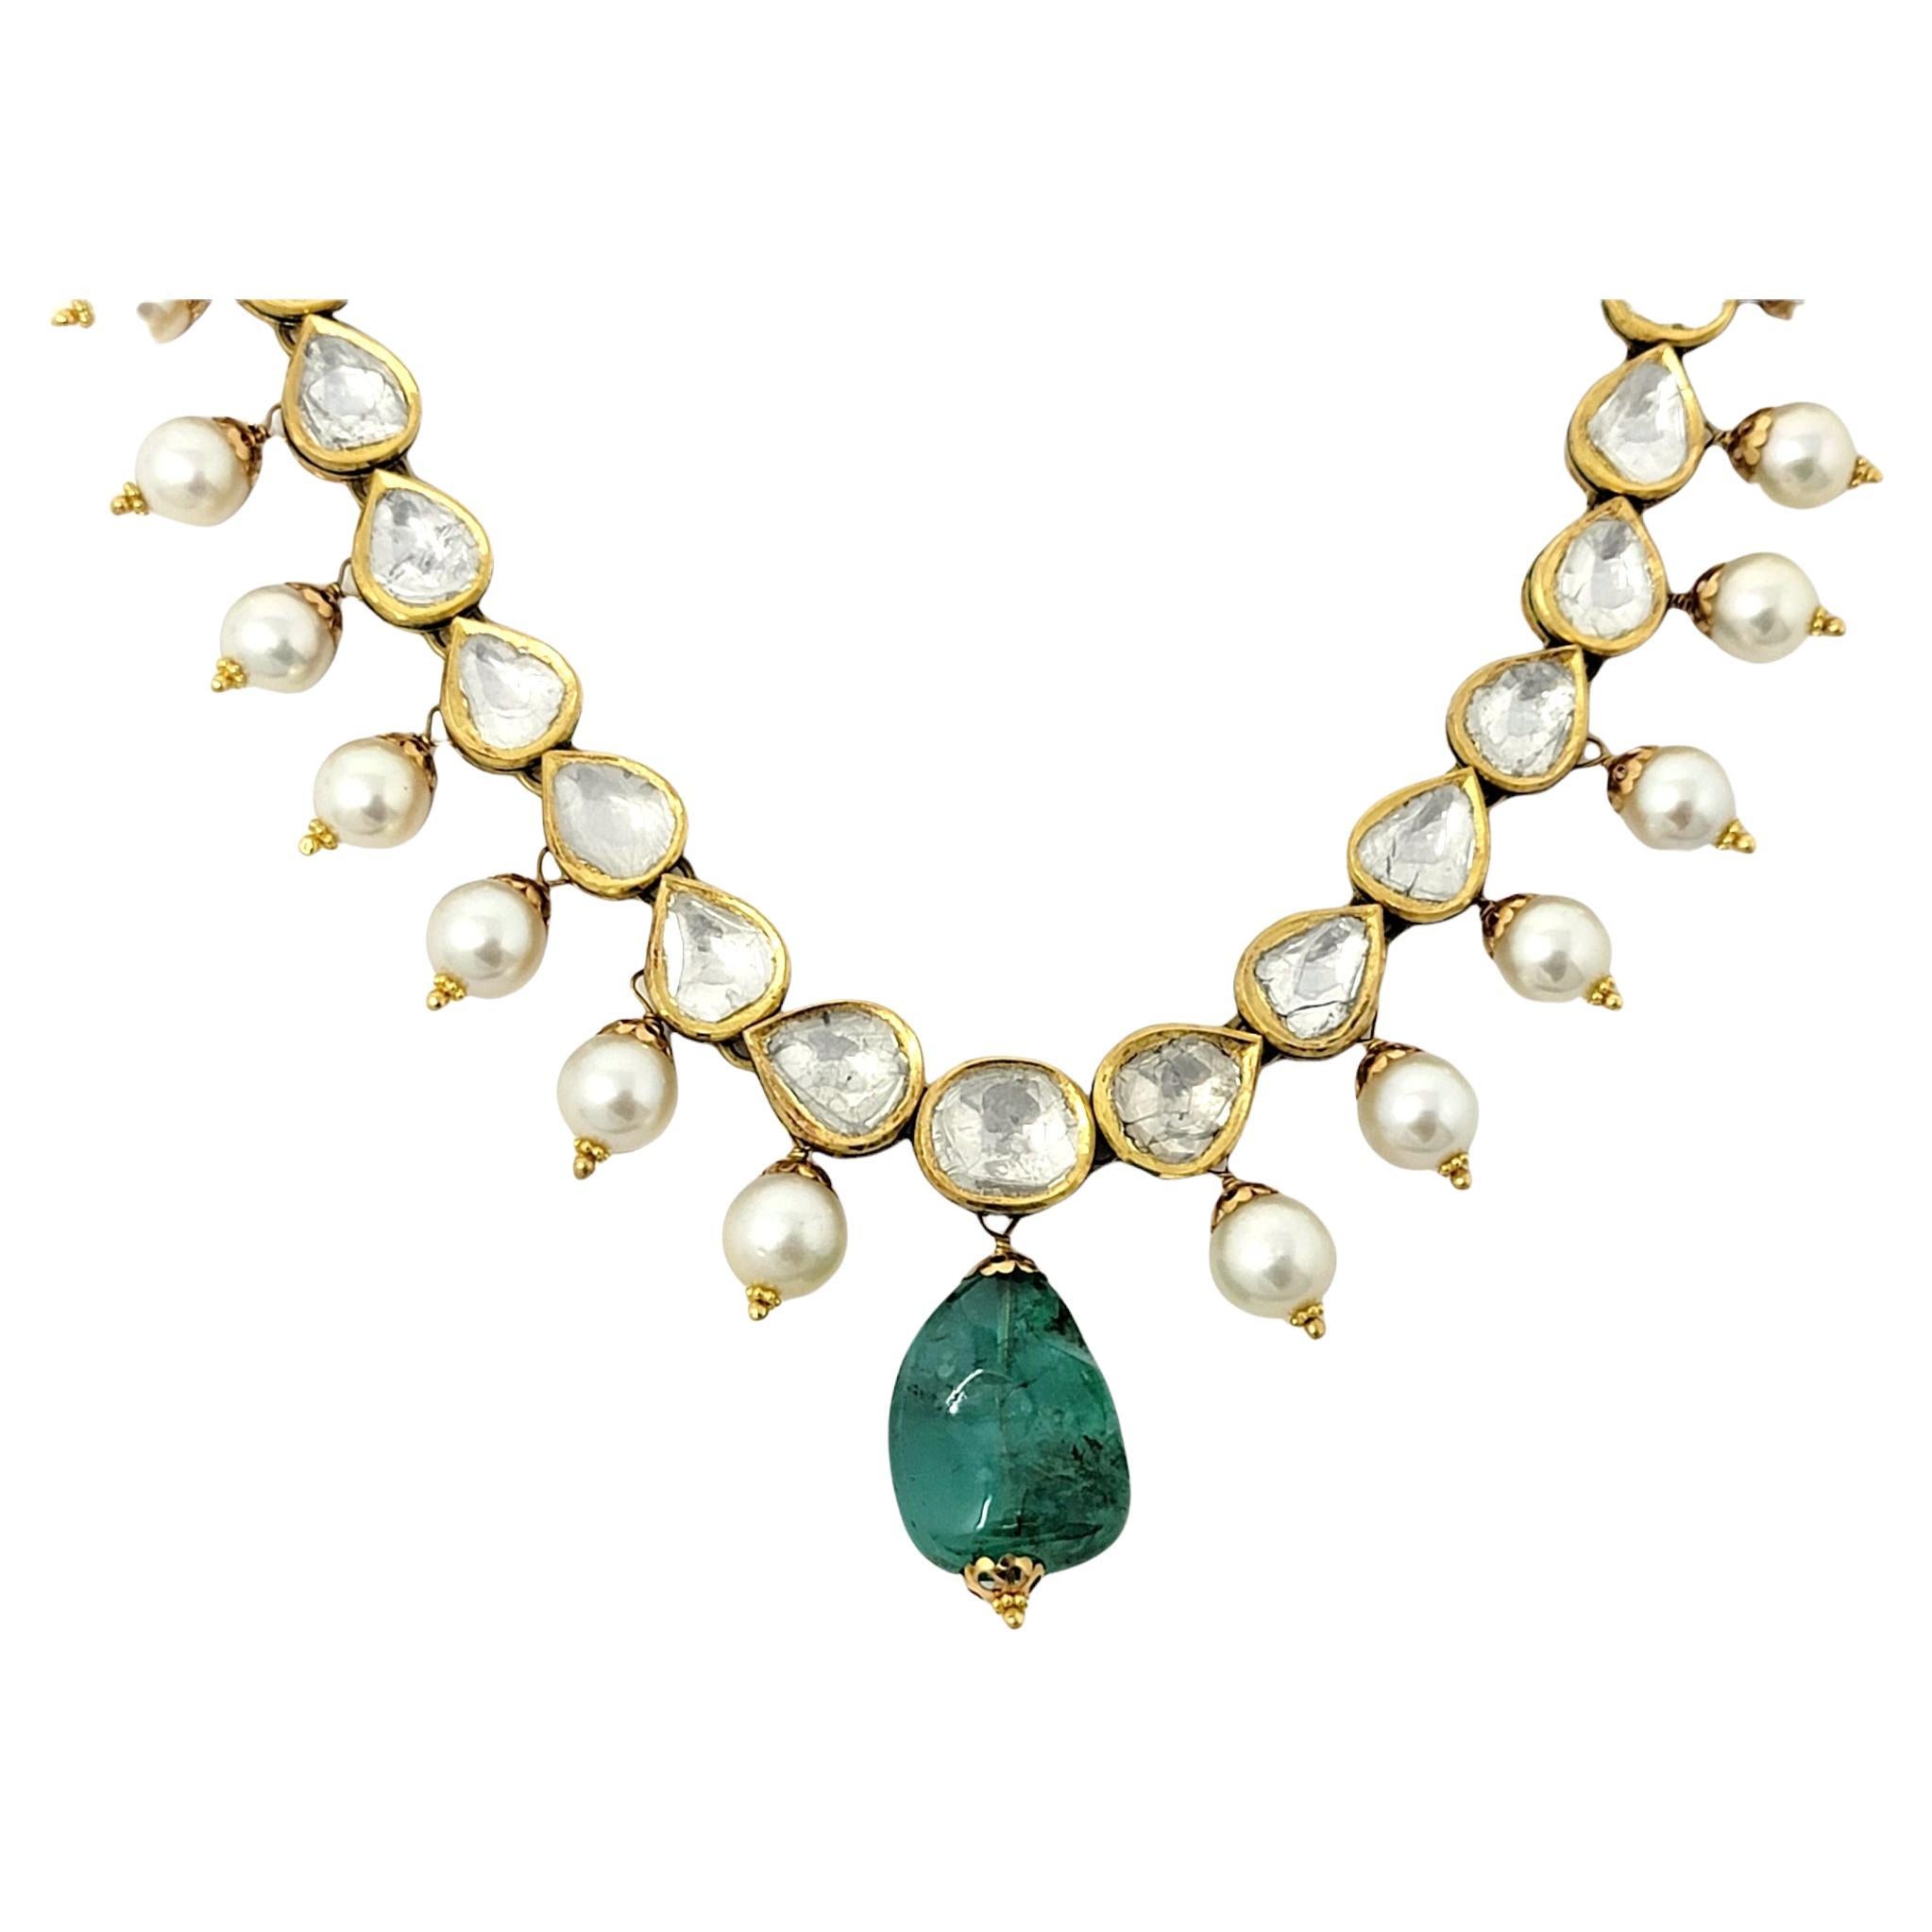 Vintage Handmade Mother of Pearl, Uncut Diamond and Emerald Stone Polki Necklace For Sale